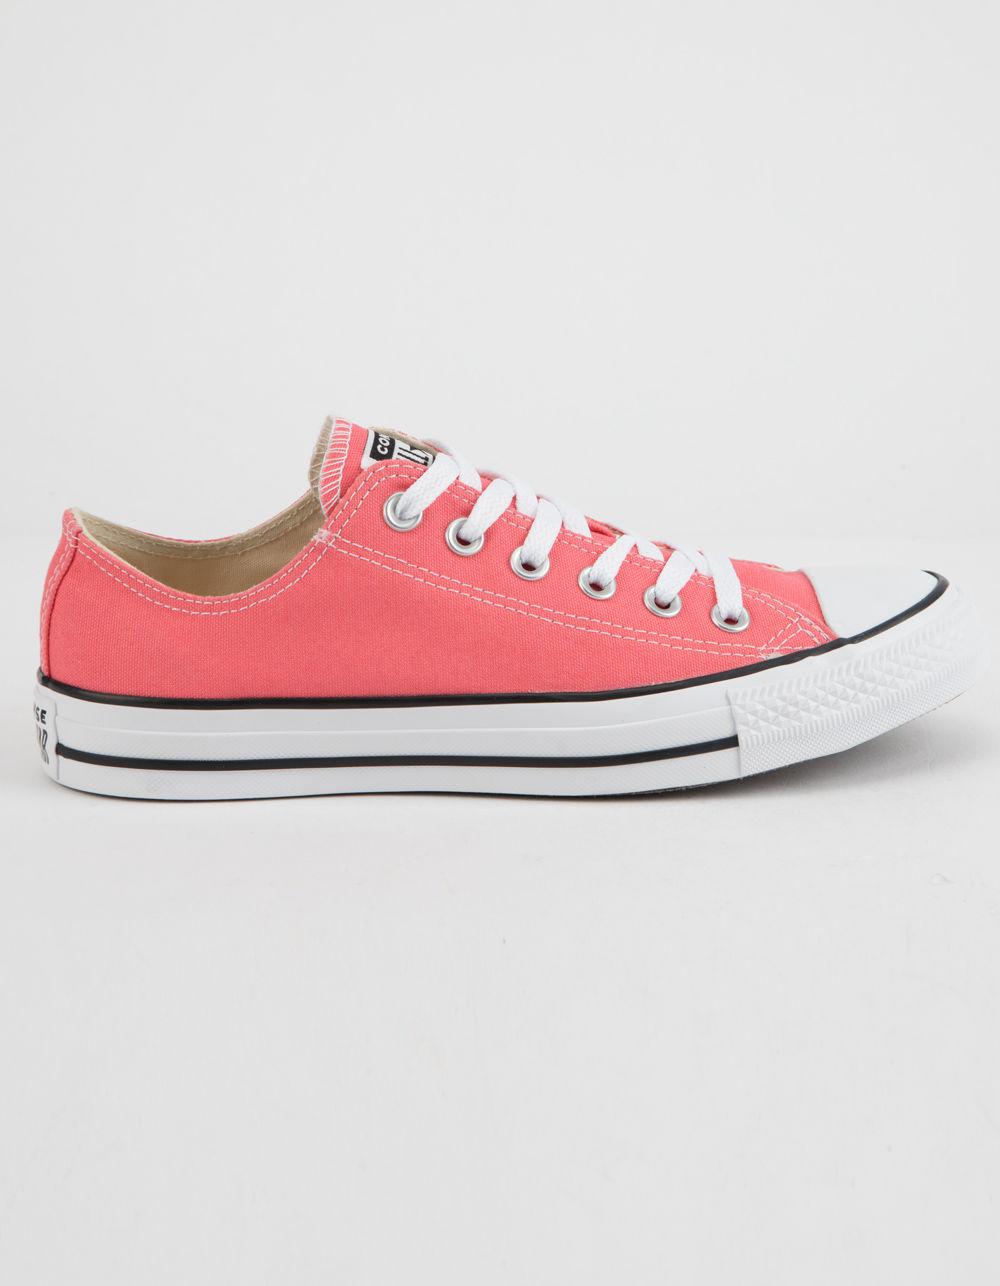 coral colored converse shoes